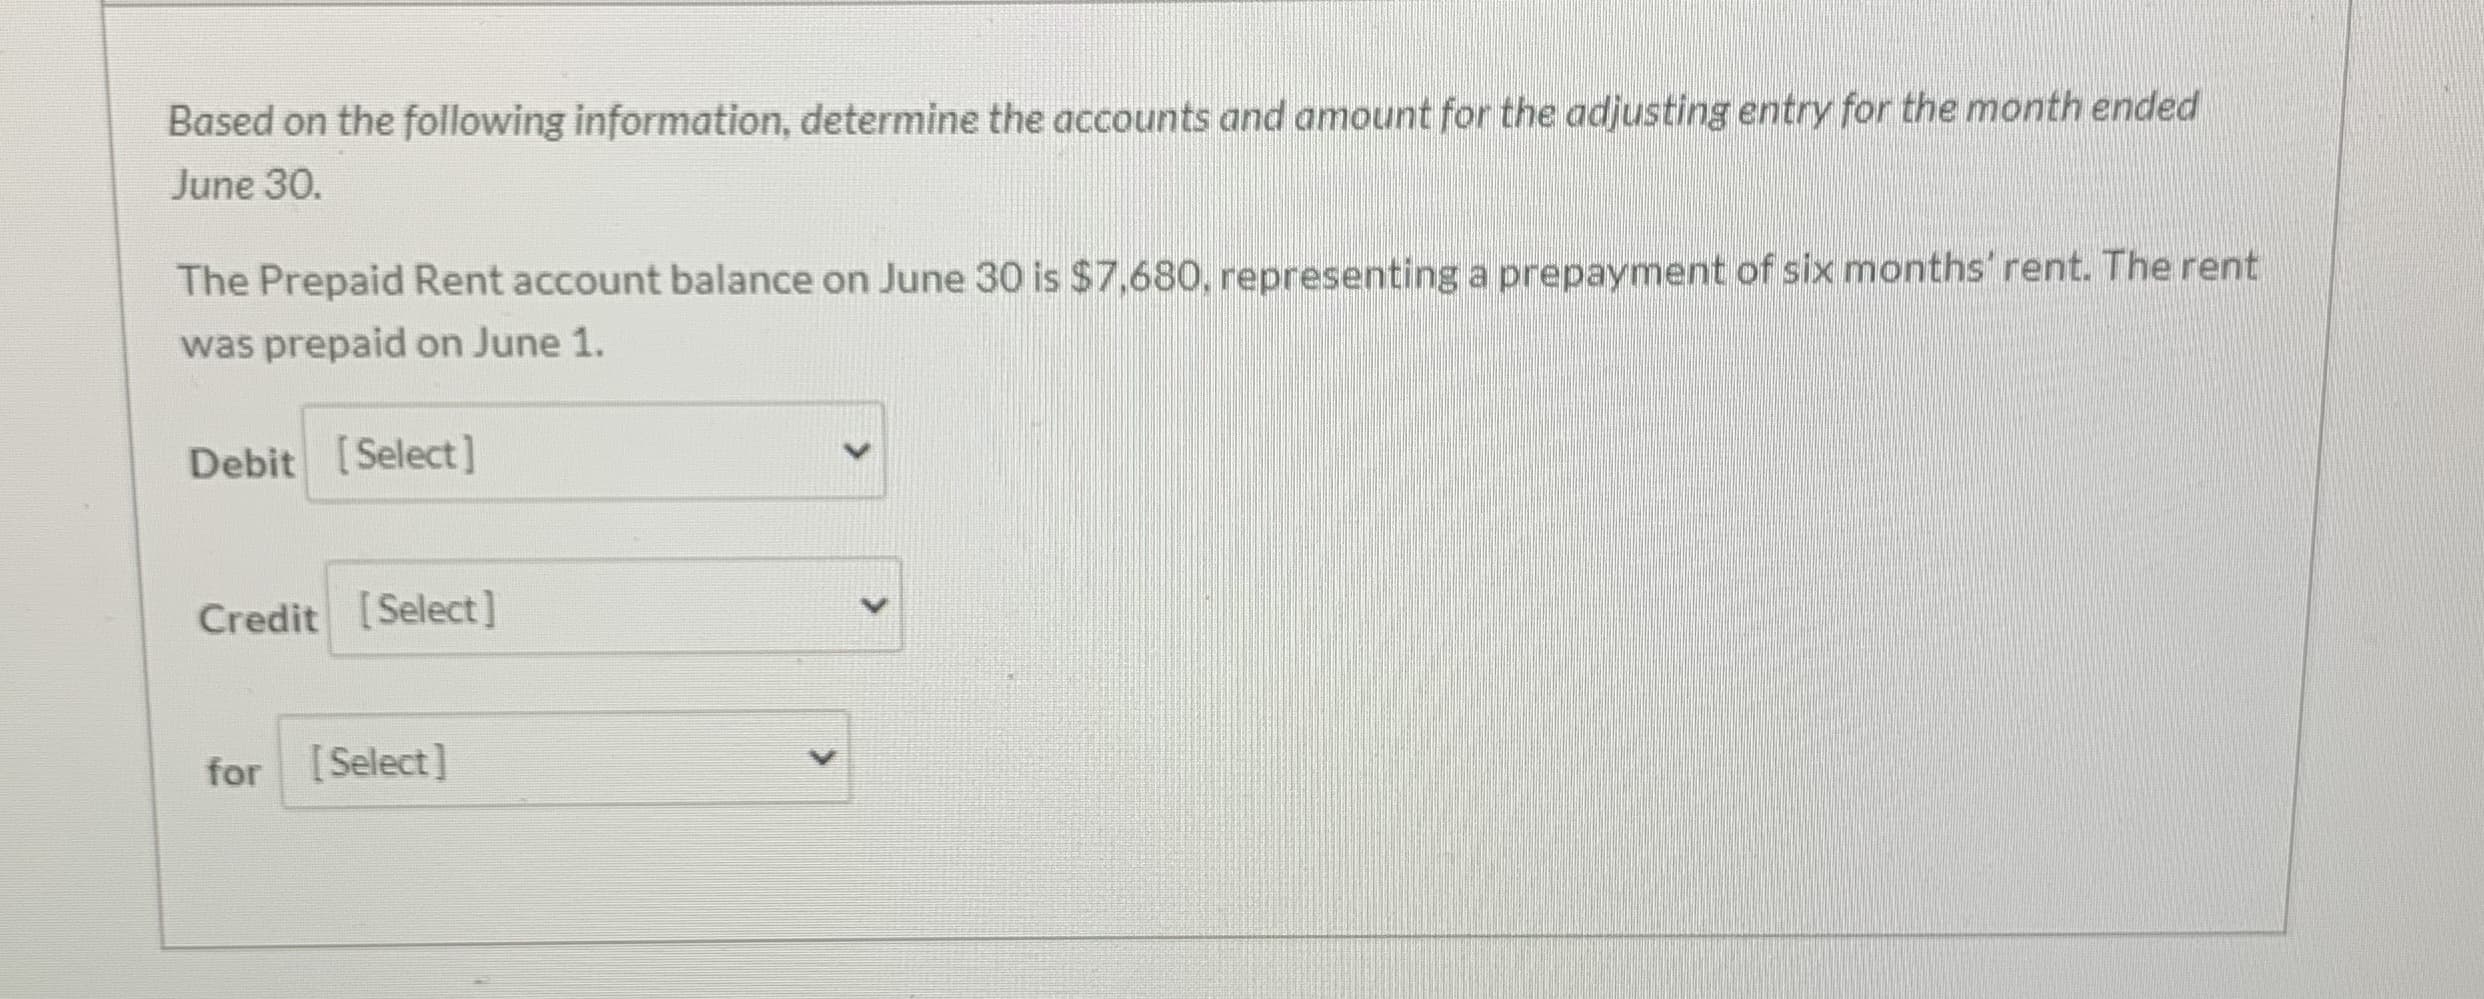 Based on the following information, determine the accounts and amount for the adjusting entry for the month ended
June 30.
The Prepaid Rent account balance on June 30 is $7,680, representing a prepayment of six months' rent. The rent
was prepaid on June 1.
